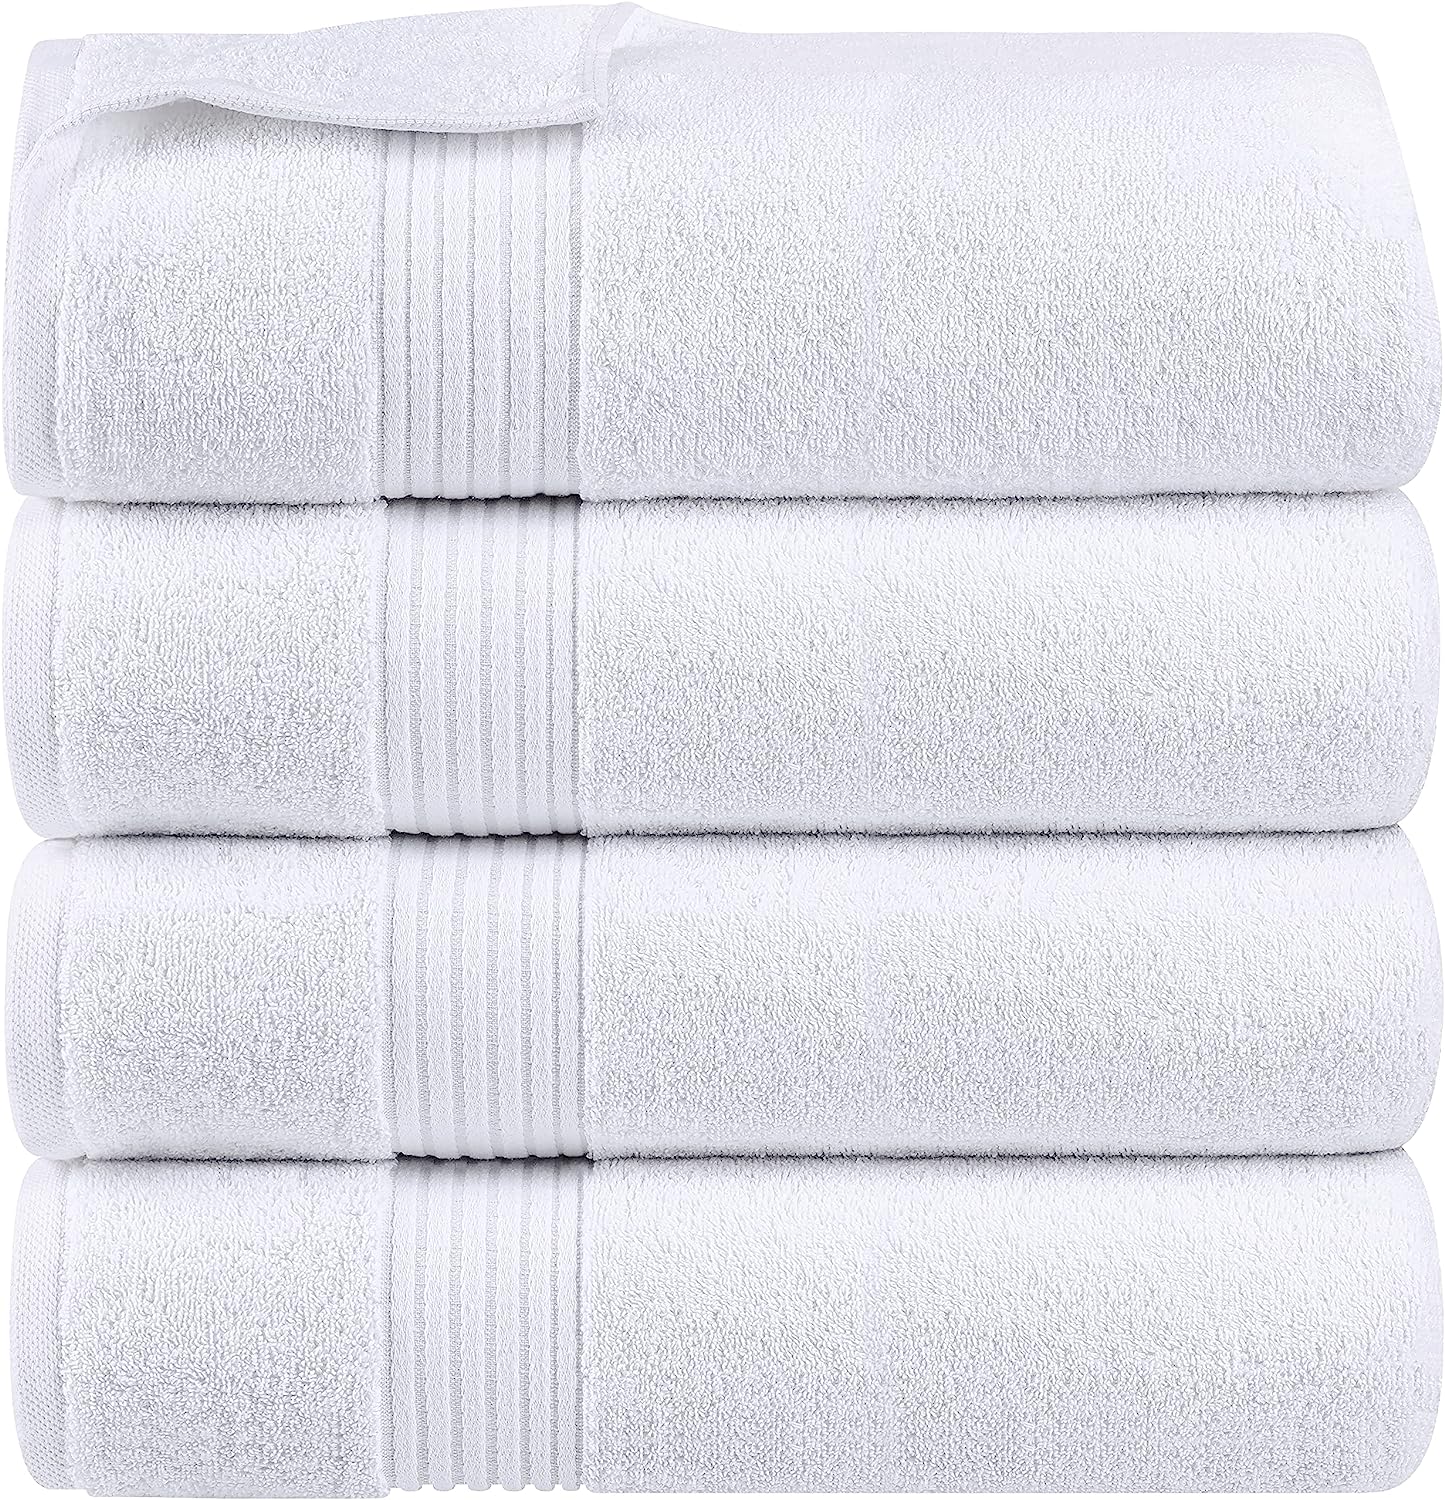 Utopia Towels 6 Pack Bath Towel Set, 100% Ring Spun Cotton (24 x 48 Inches)  Medium Lightweight and Highly Absorbent Quick Drying Towels, Premium Towels  for Hotel, Spa and Bathroom (White) 24 x 48 Inches White